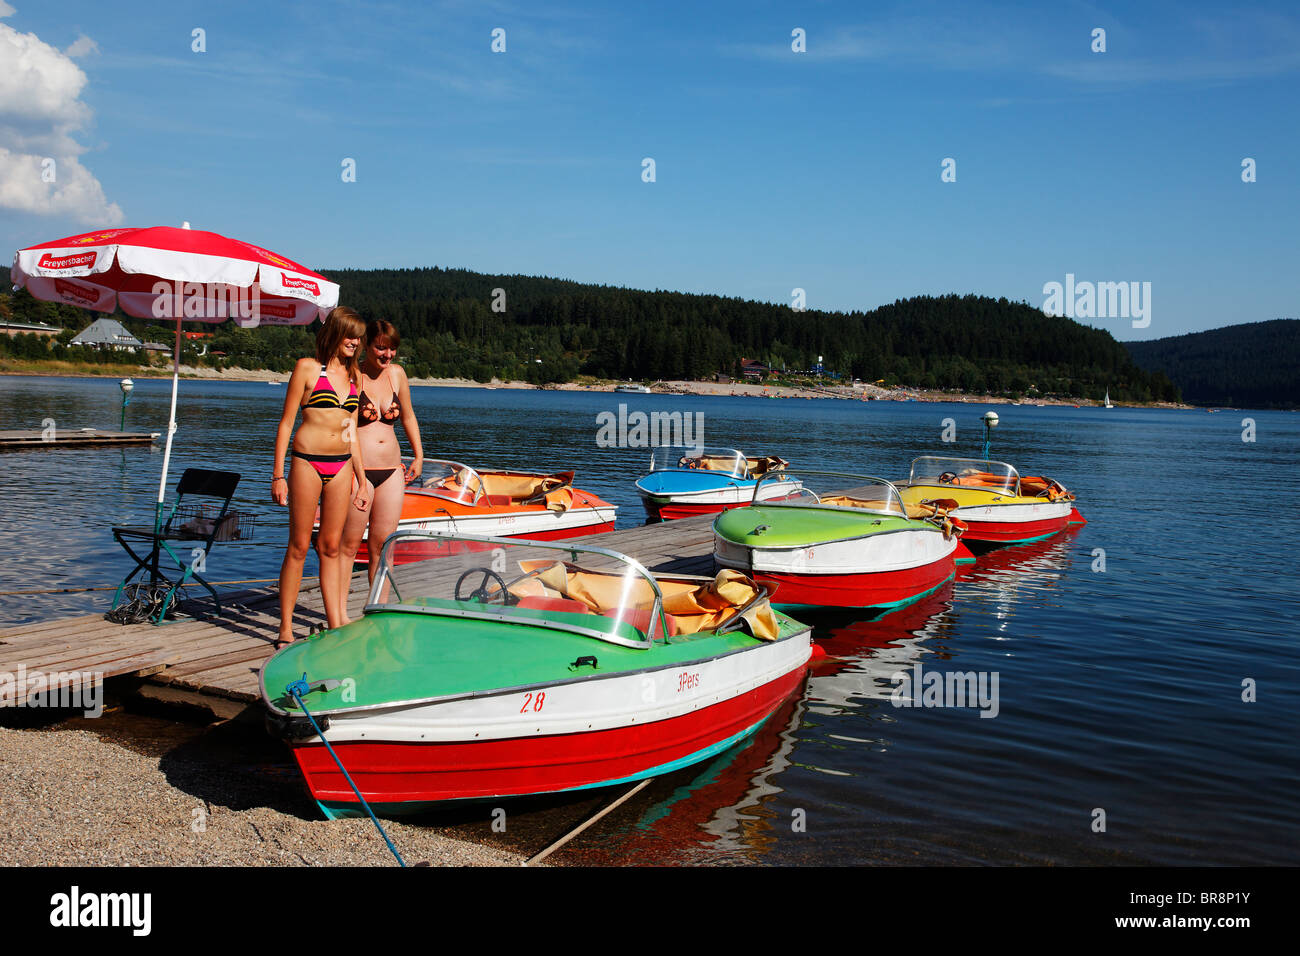 Boats at lake Schluchsee, Bade-Wurttemberg, Germany Stock Photo